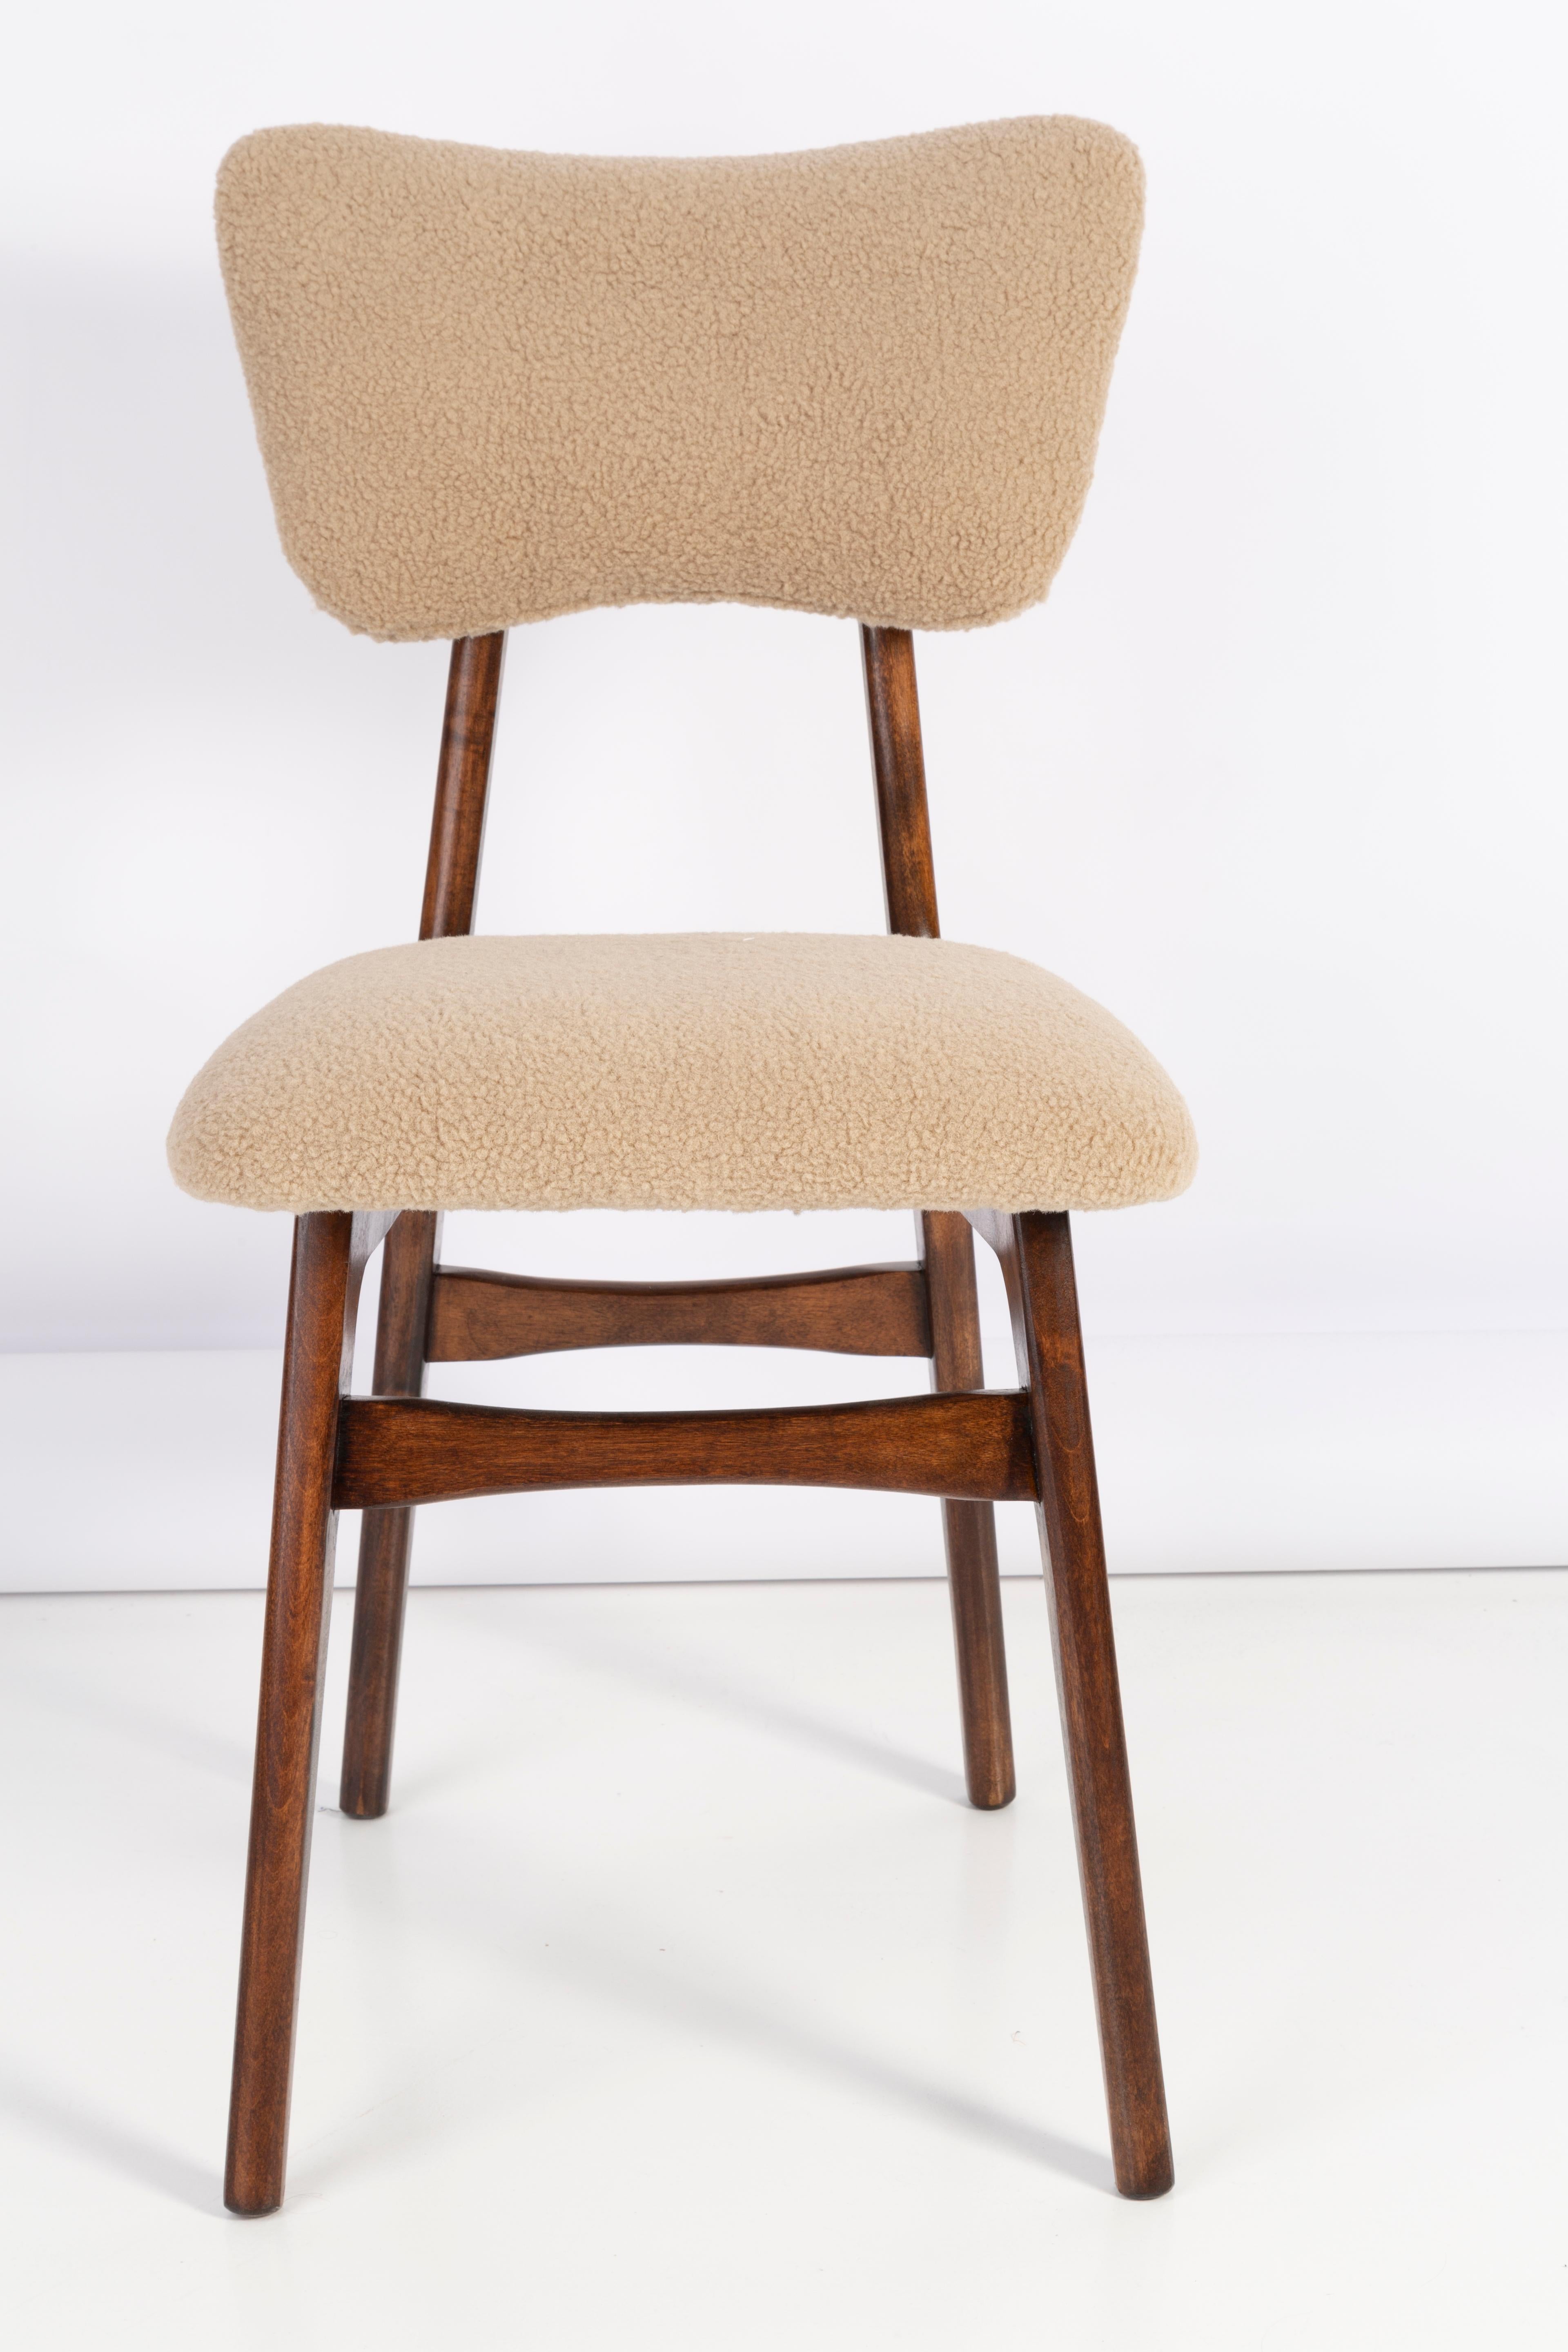 Set of Two 20th Century Camel Boucle Chairs, 1960s For Sale 6